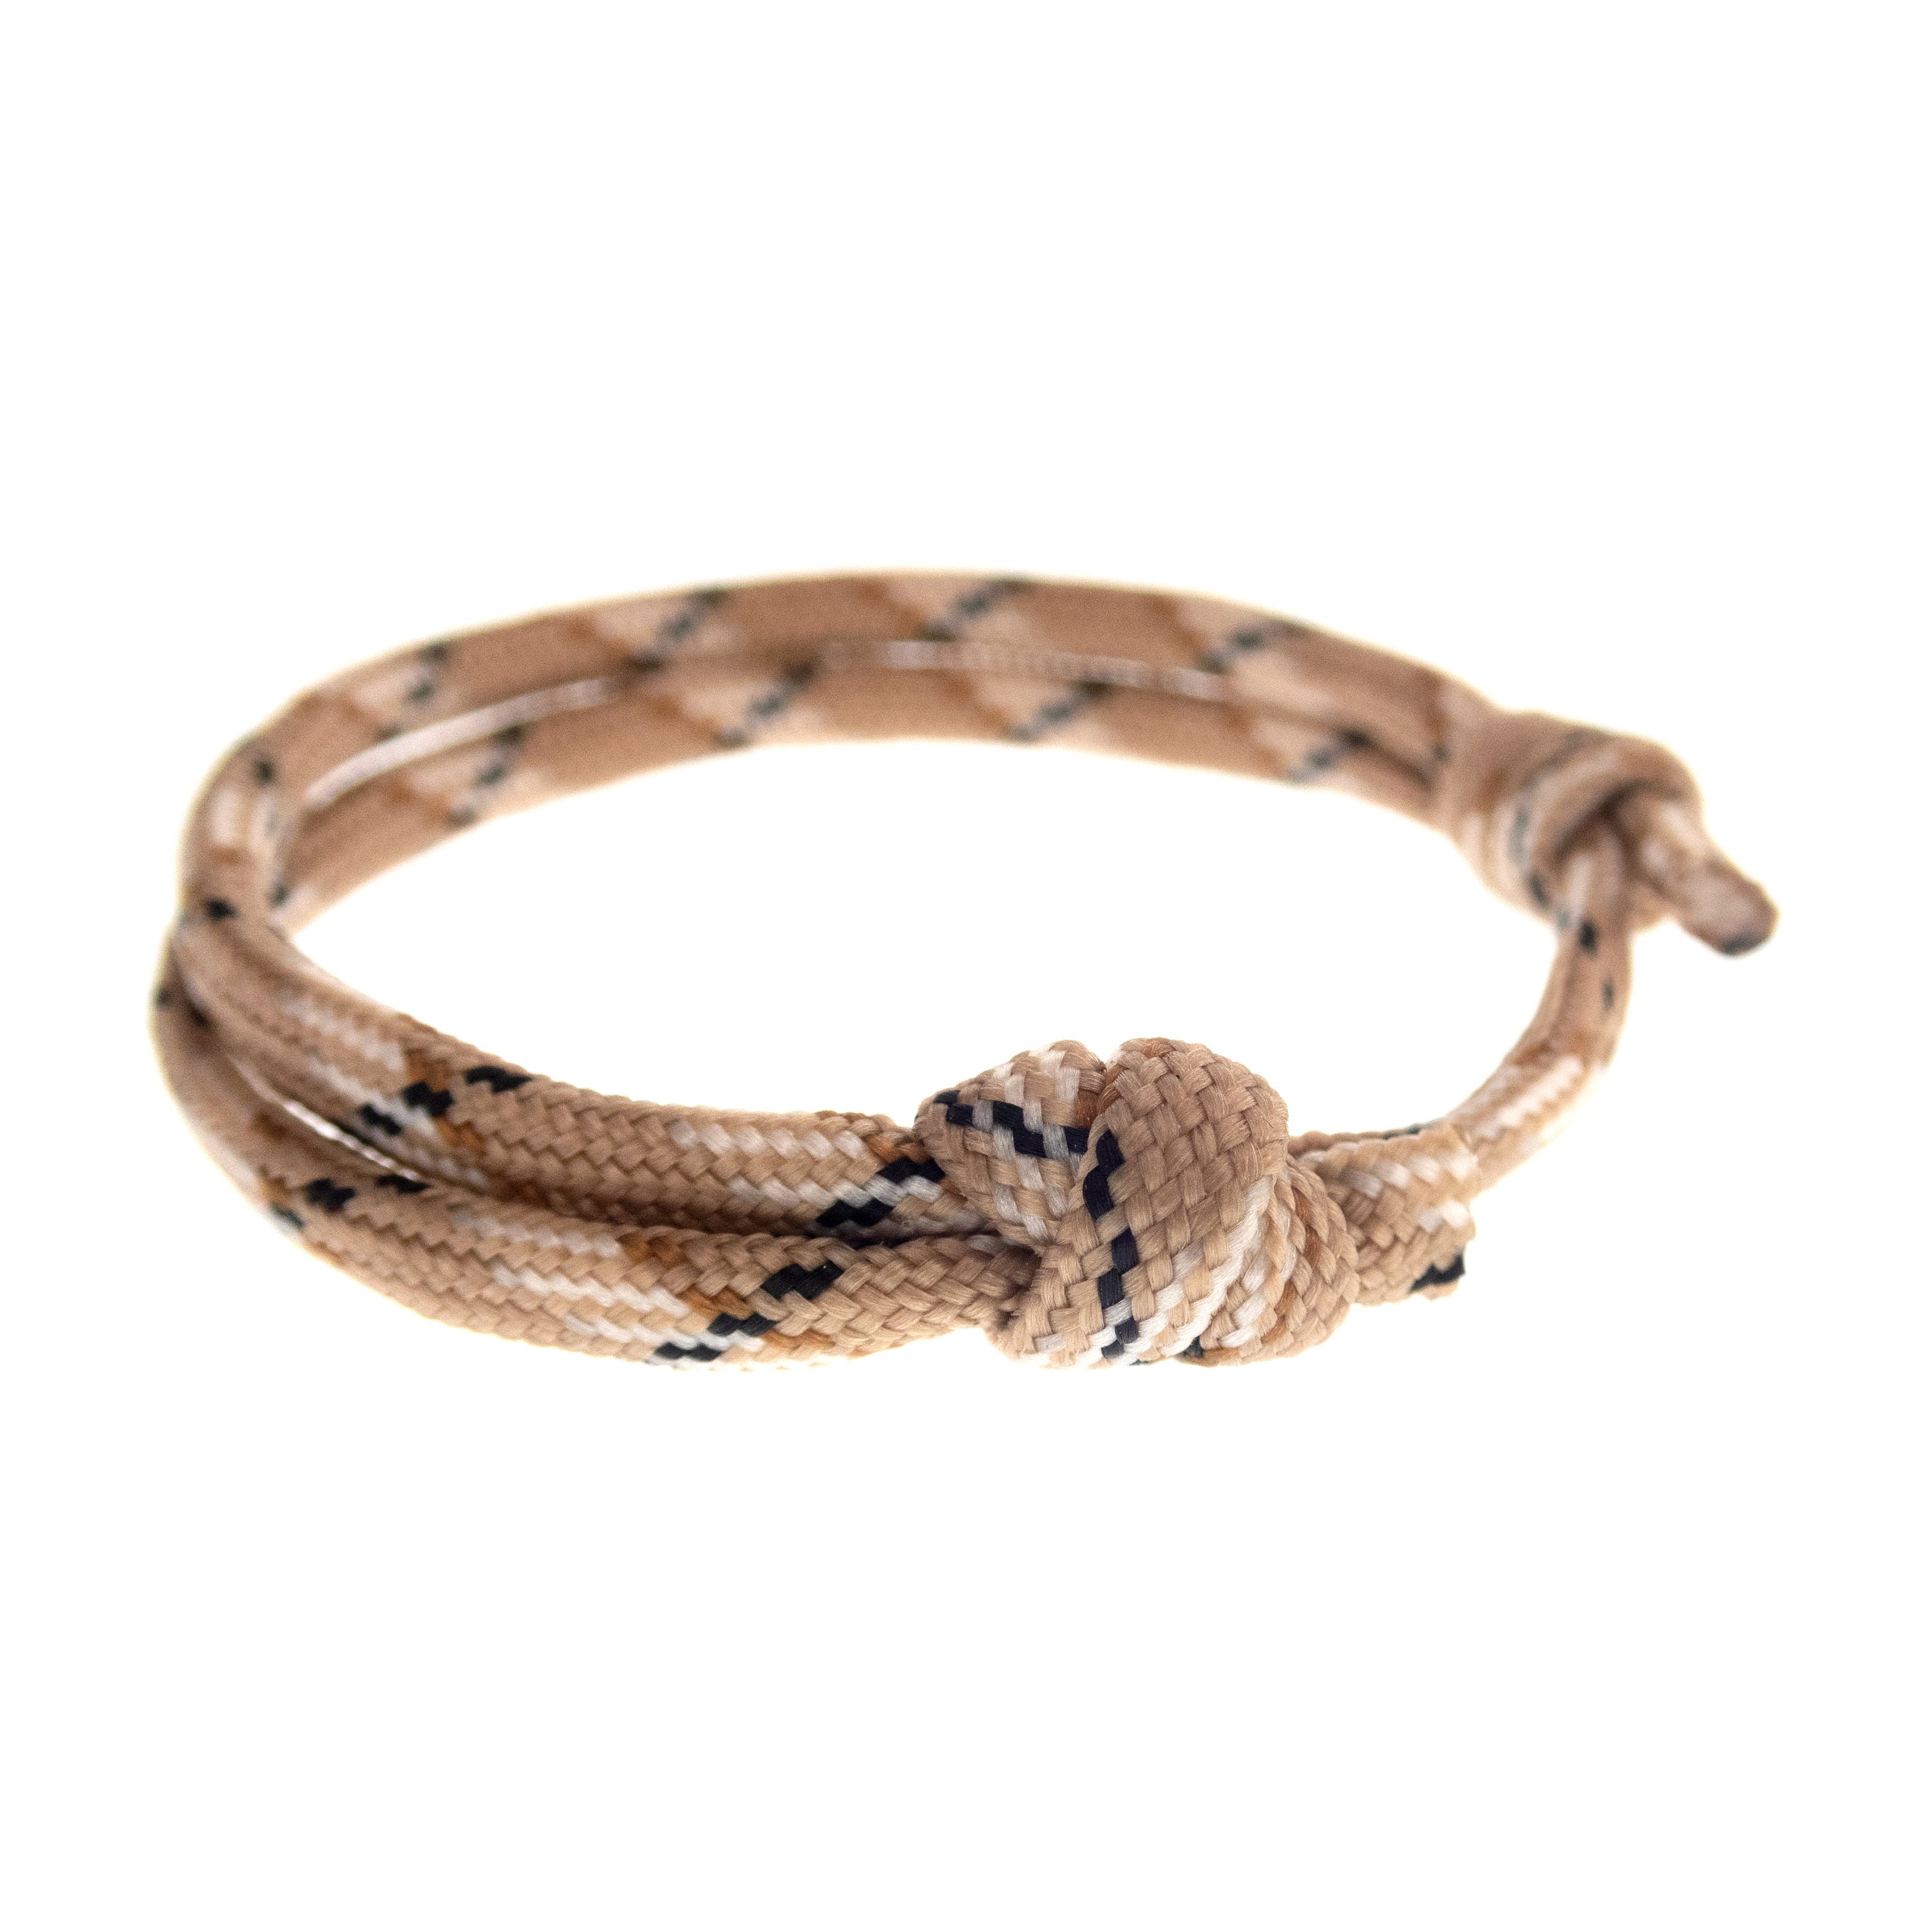 Nautical Rope Bracelet for Men or Ladies. Sailing Cord Jewelry